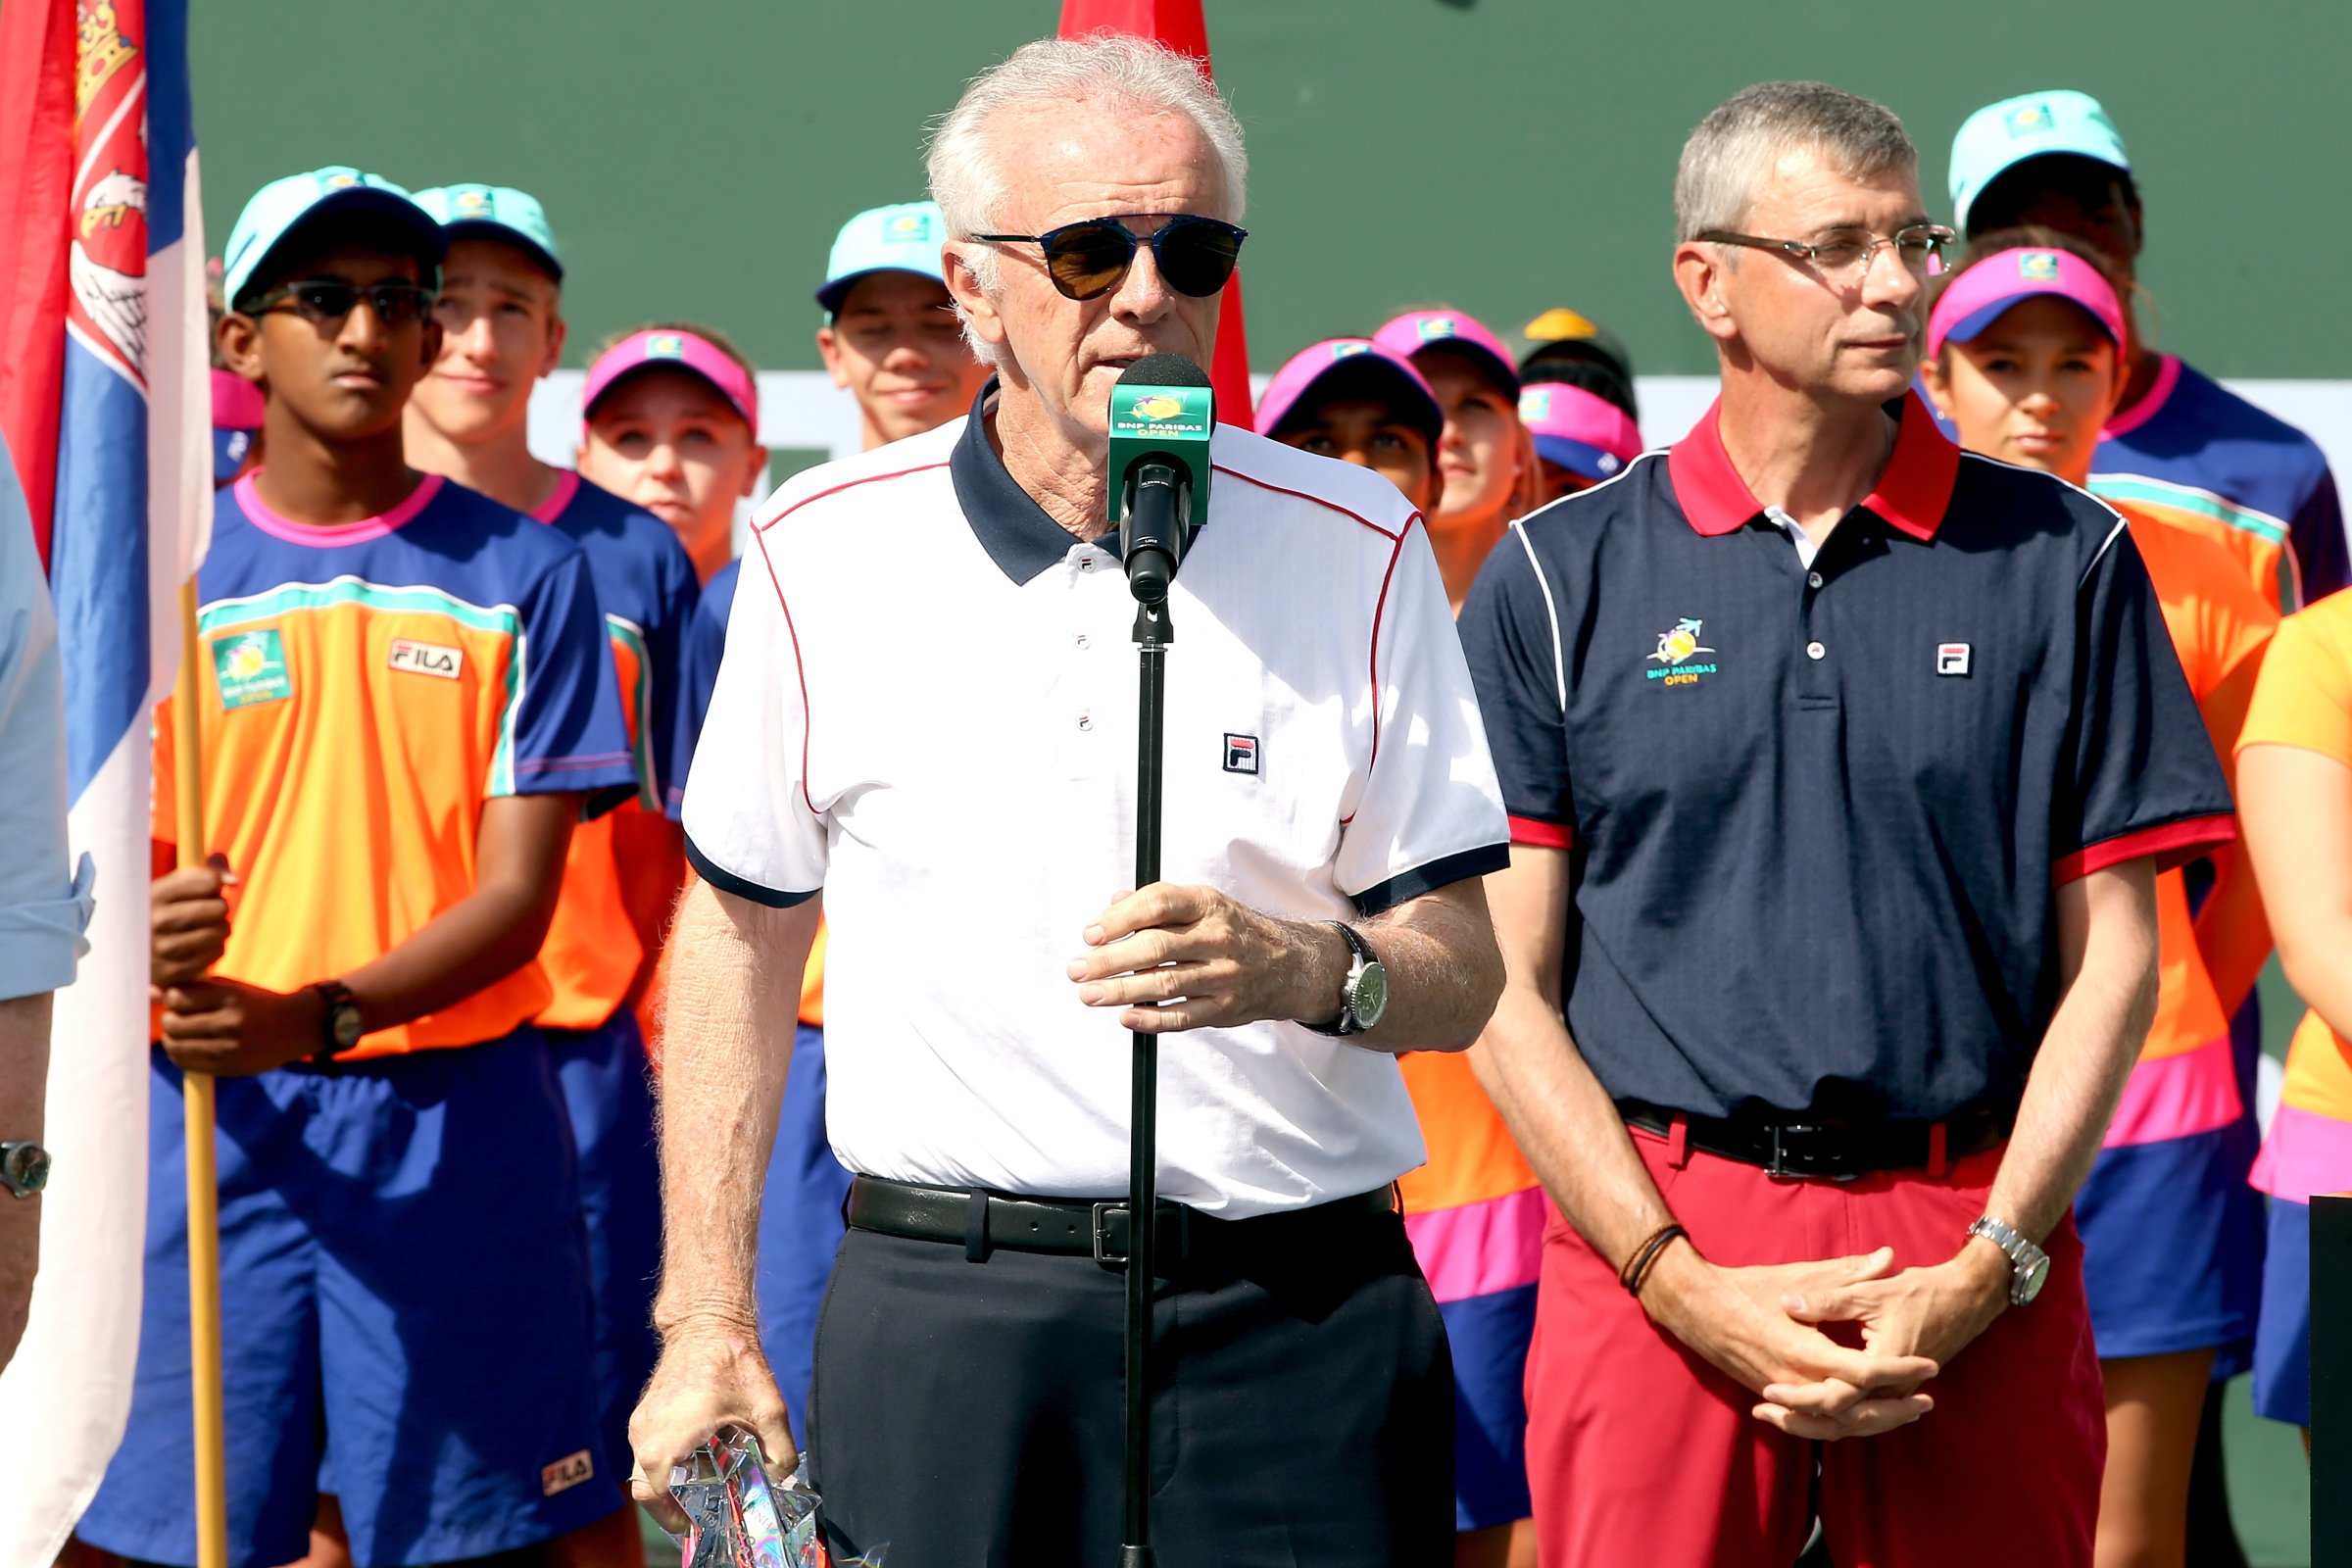 CEO Raymond Moore address the audience at the trophy ceremony of the BNP Paribas Open at the Indian Wells Tennis Garden in Indian Wells, Calif., March 20, 2016.